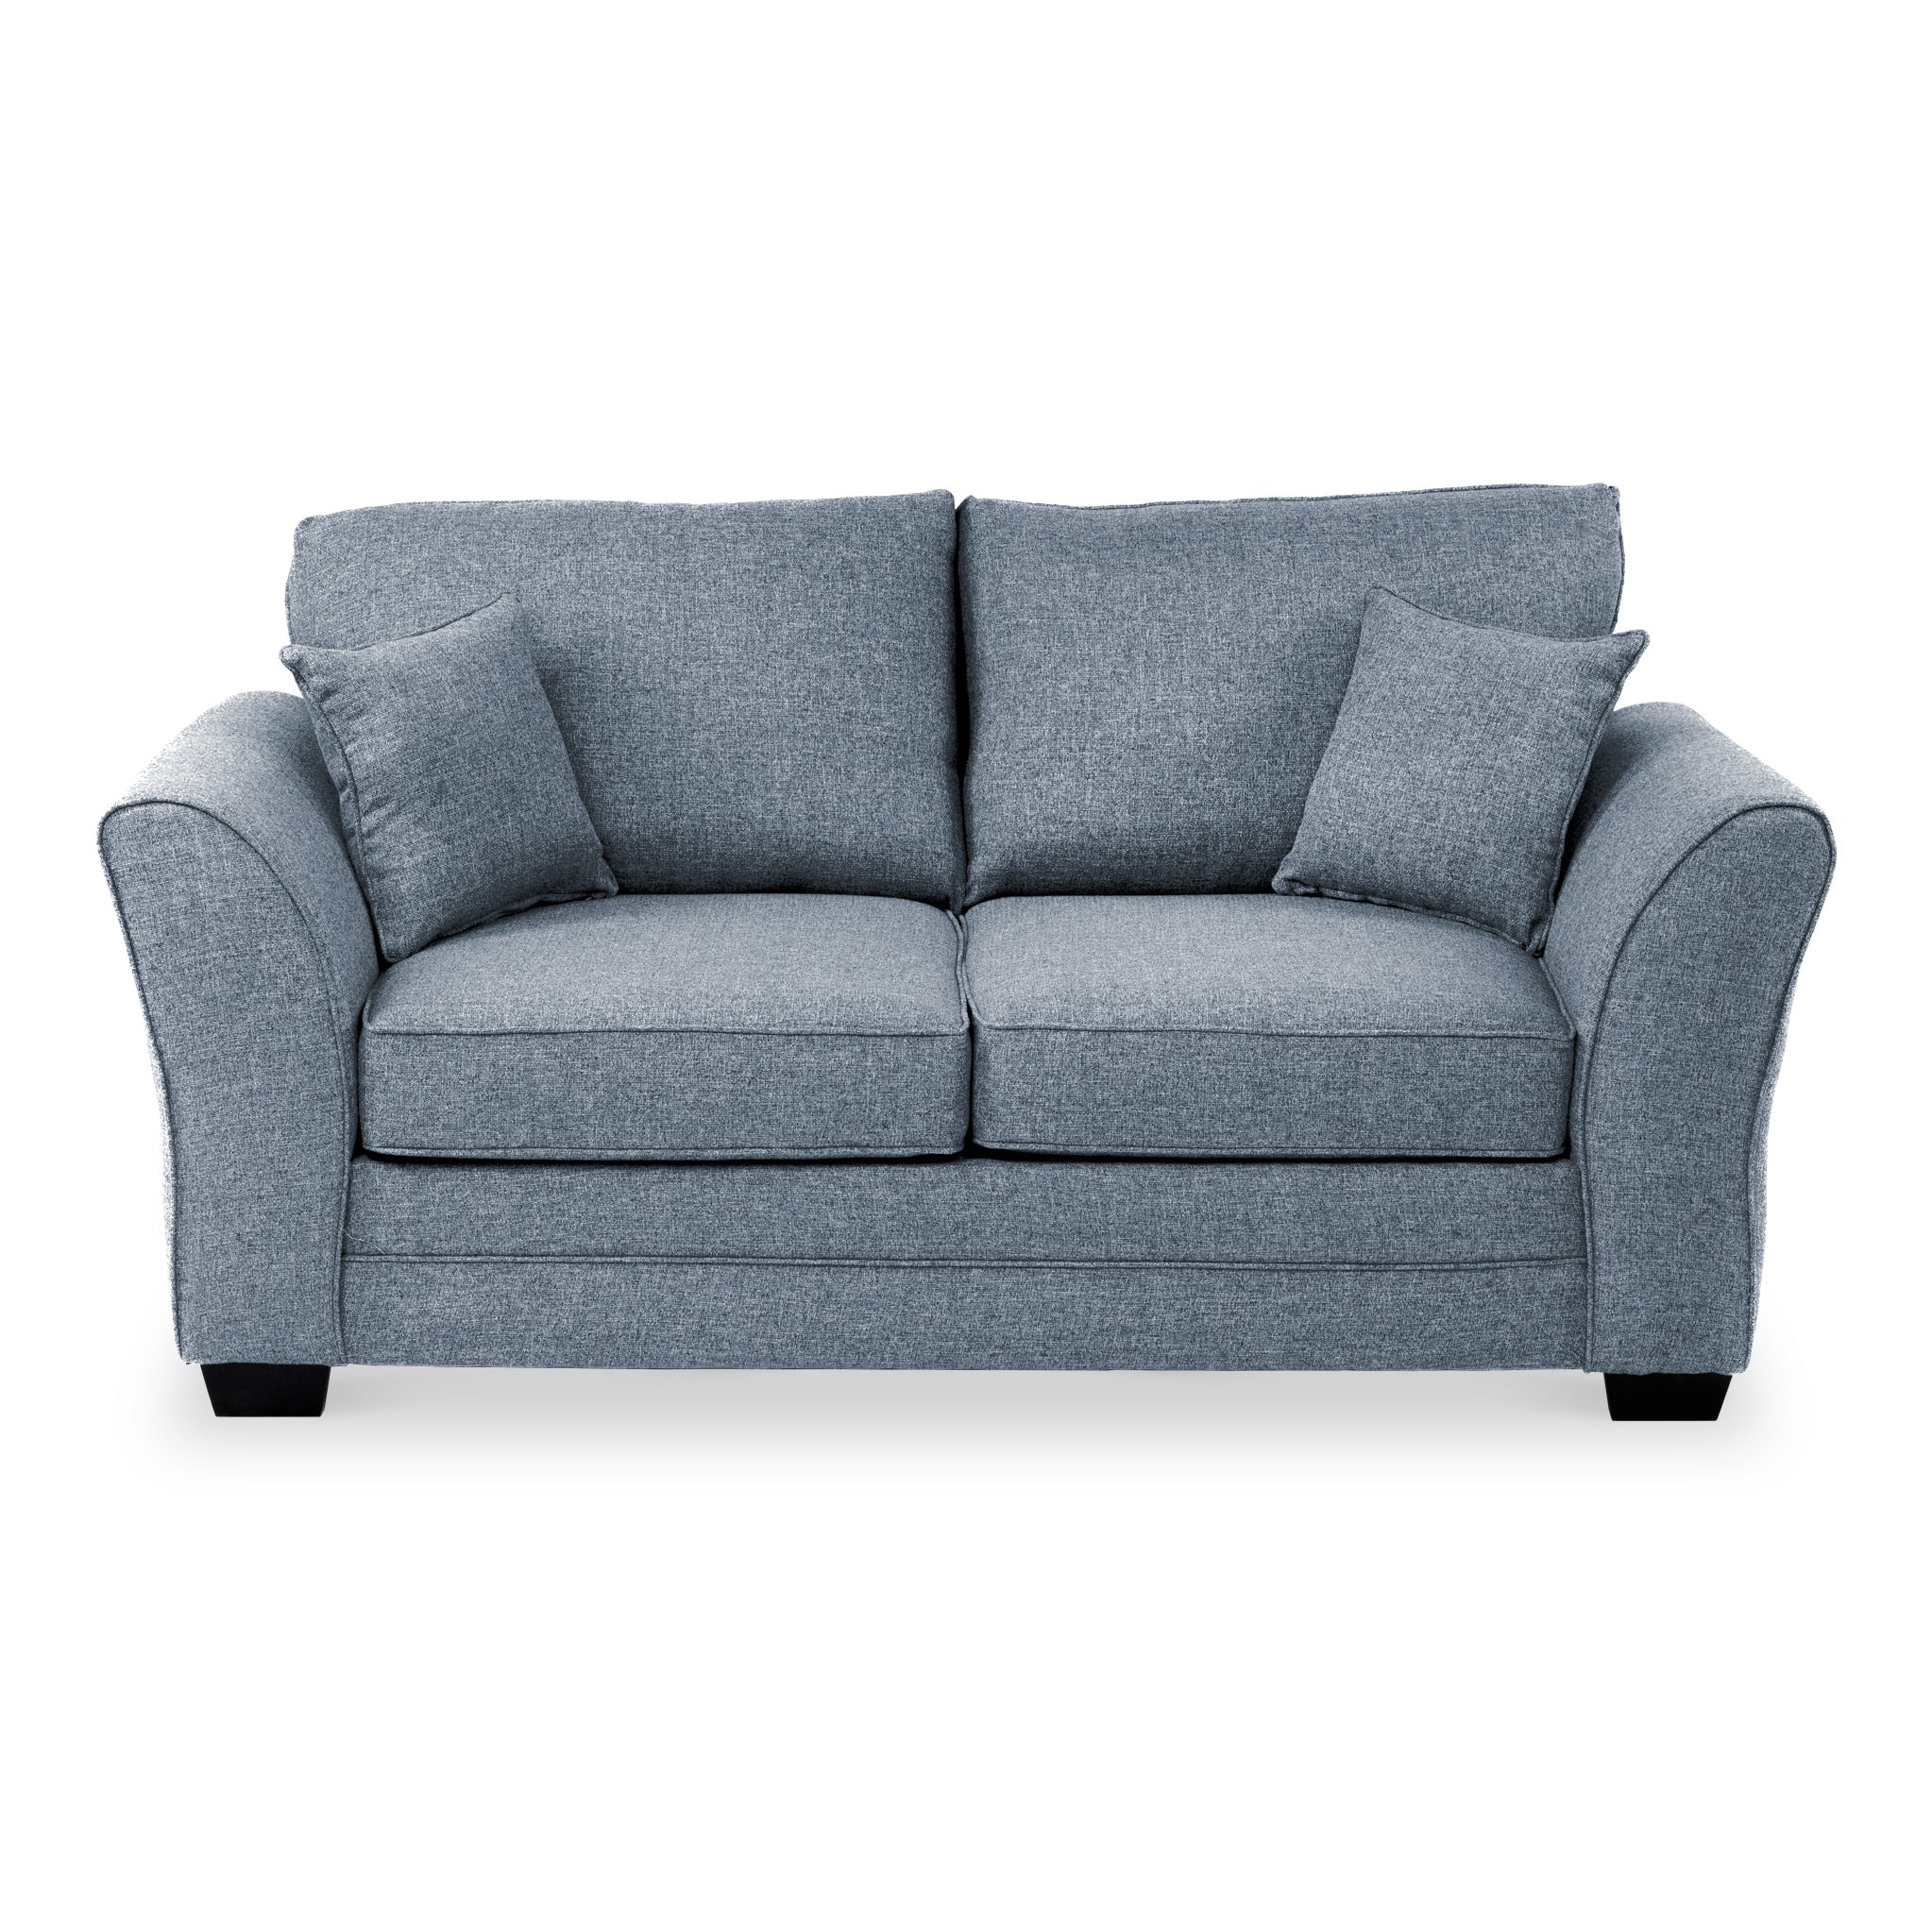 St Ives 2 Seater Sofa Bed Grey Or Blue Fabric Double Guest Bed